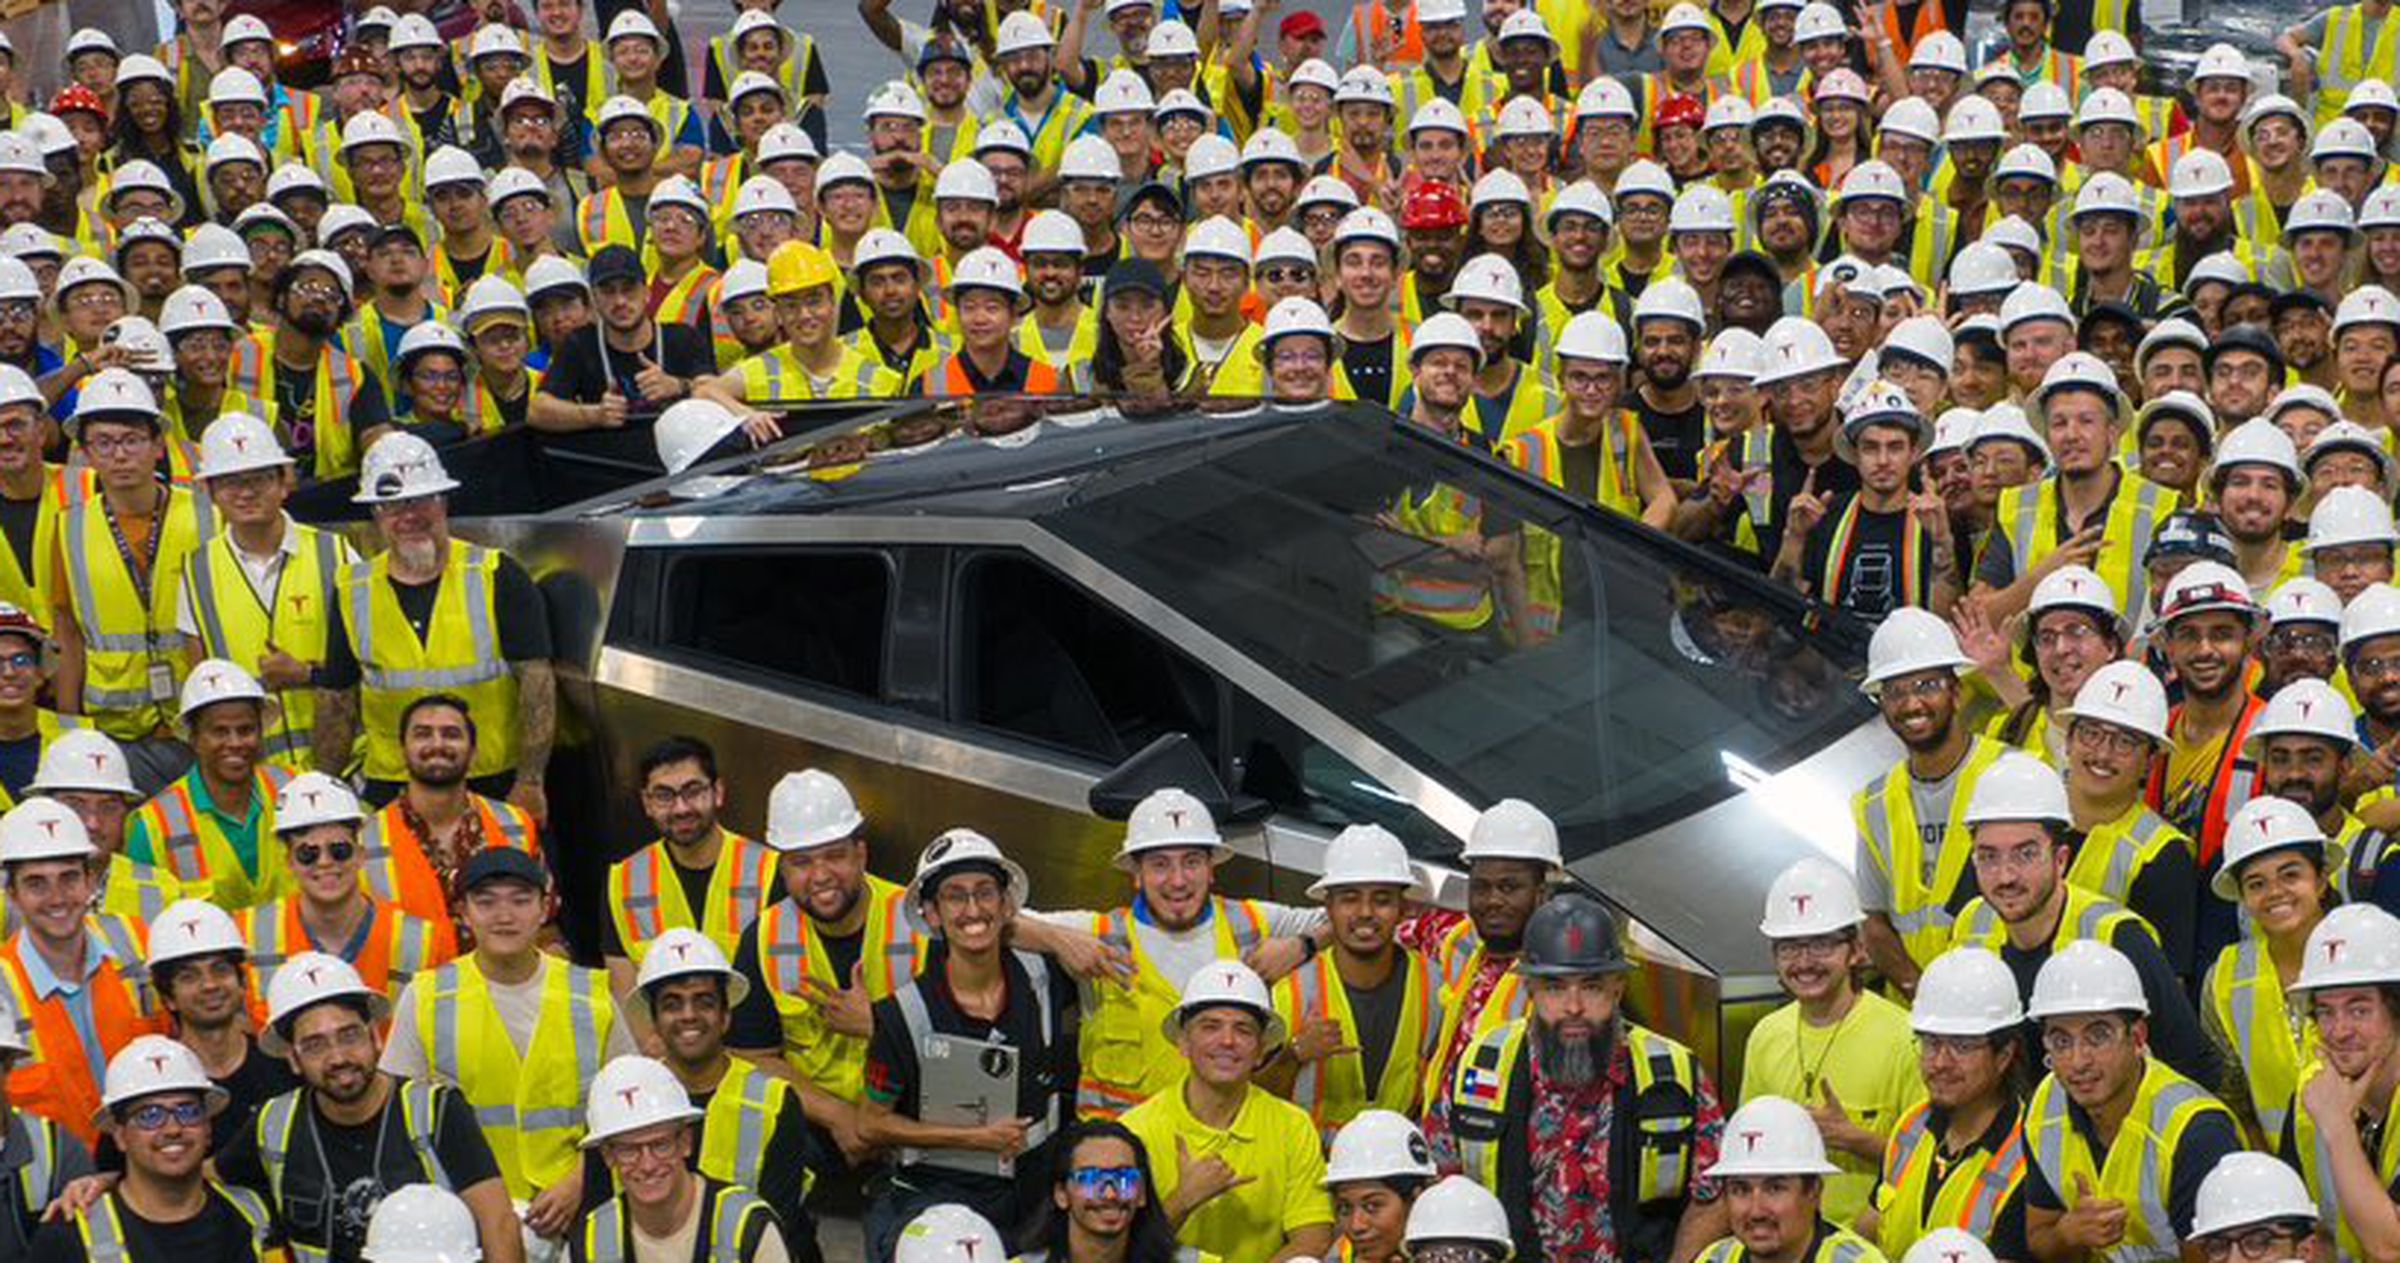 Tesla Cybertruck pickup shown surrounded by factory workers.